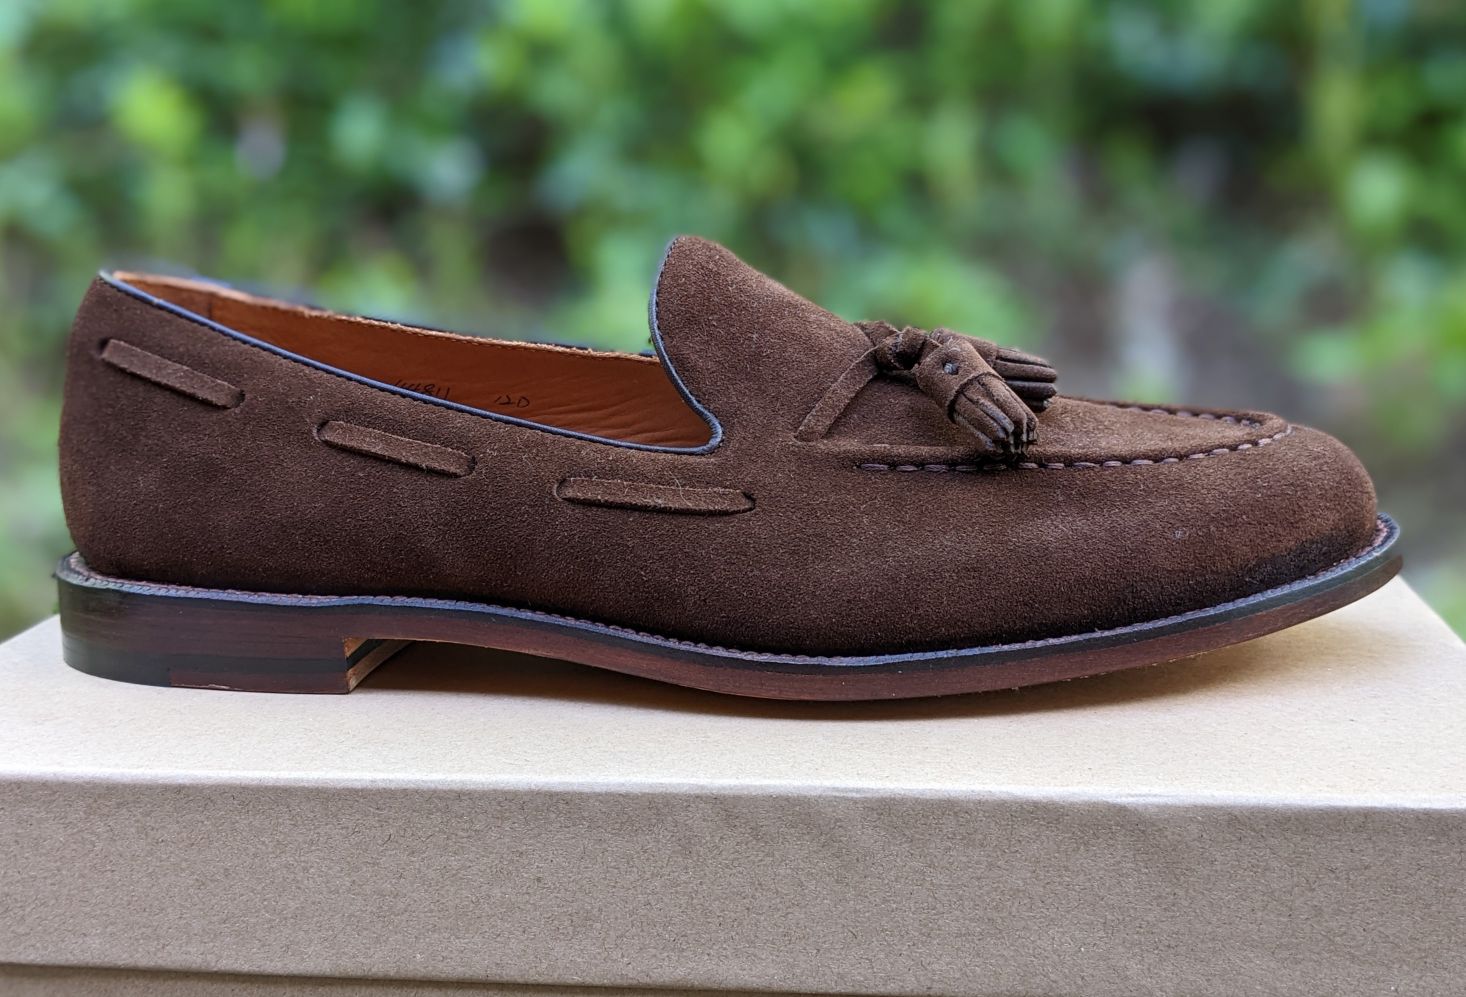 Grant Stone Tassel Loafer: A Perfect Combination?